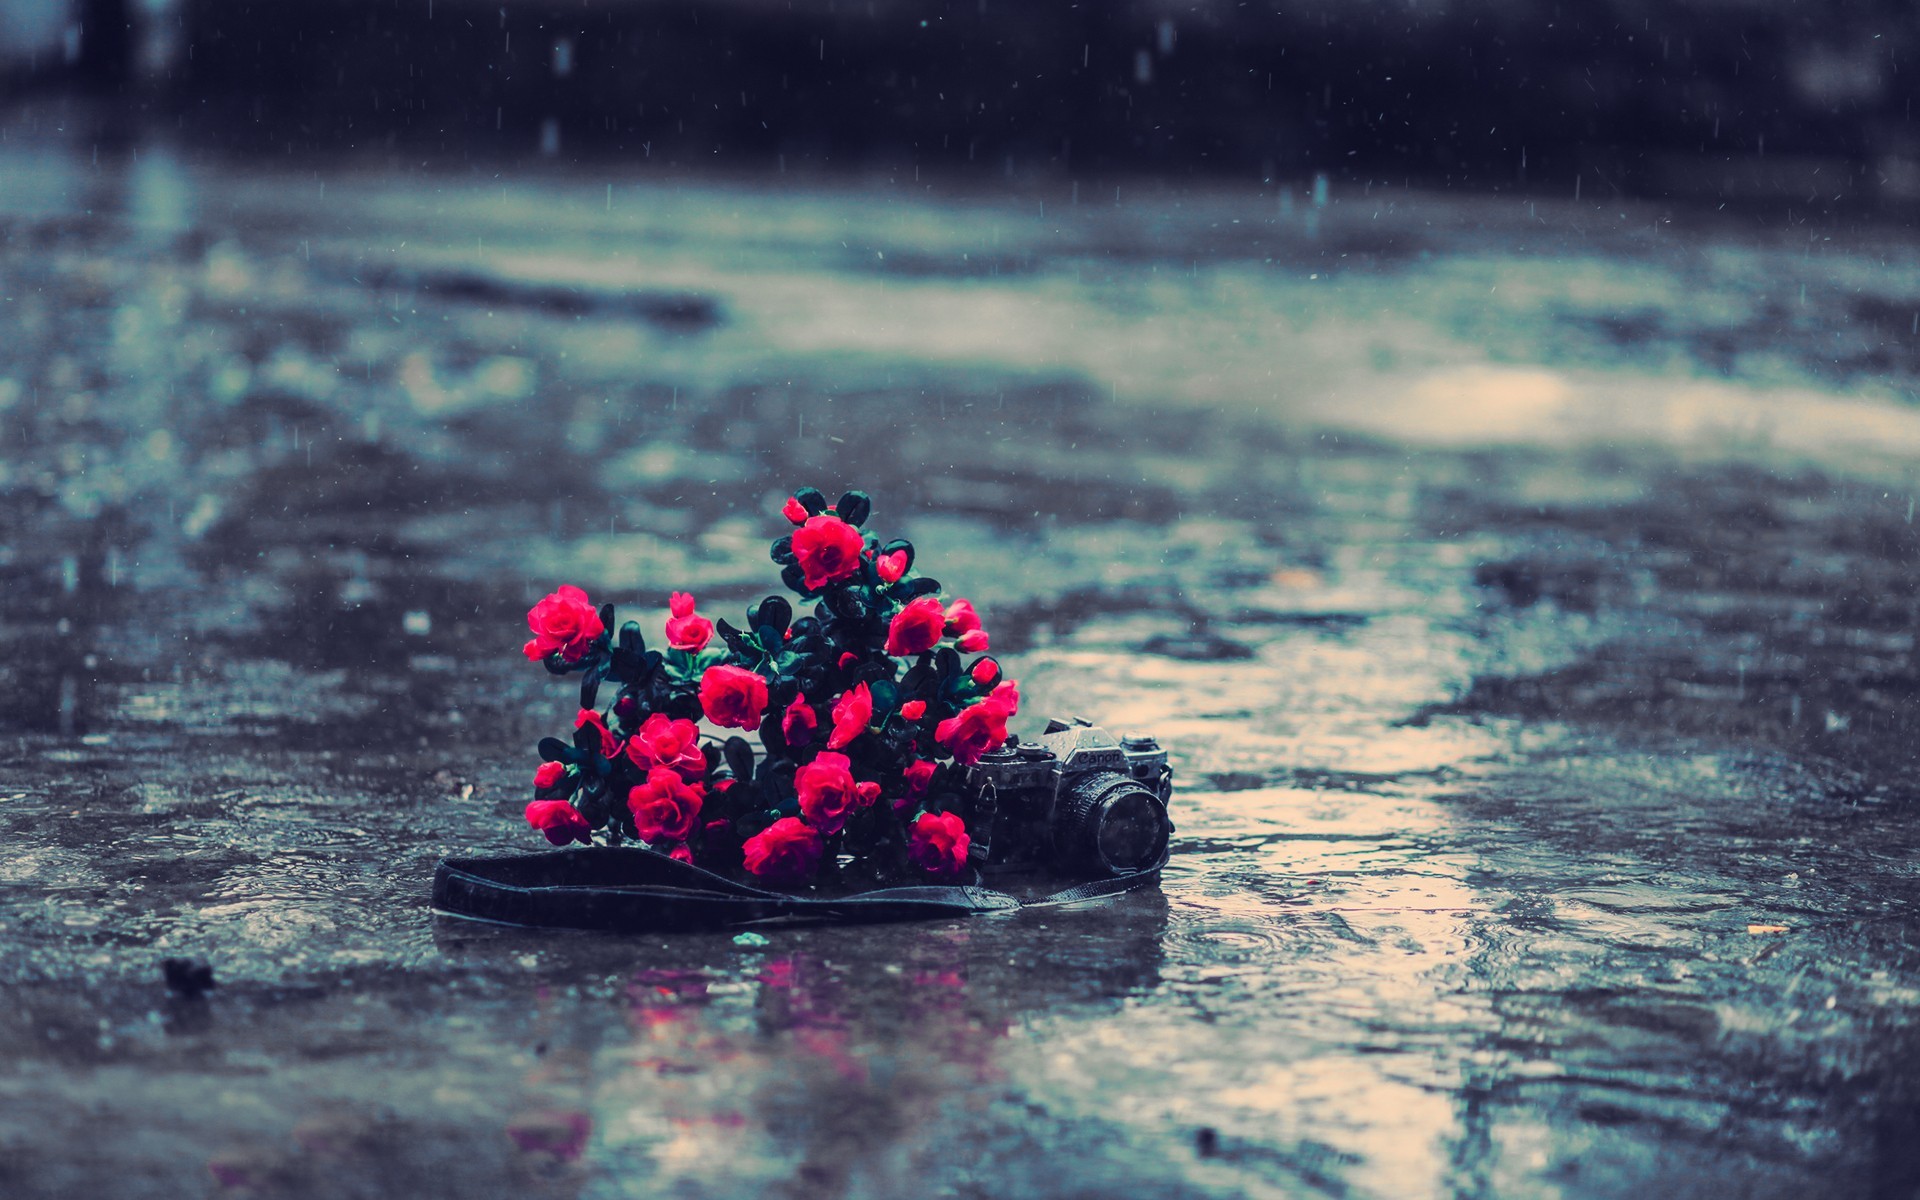 tech, Mech, Camera, Photography, Nature, Flower, Bouquets, Roses, Red, Color, Rain, Wet, Storm, Drpos, Reflections, Roads, Streets, Bokeh, Still, Life Wallpaper